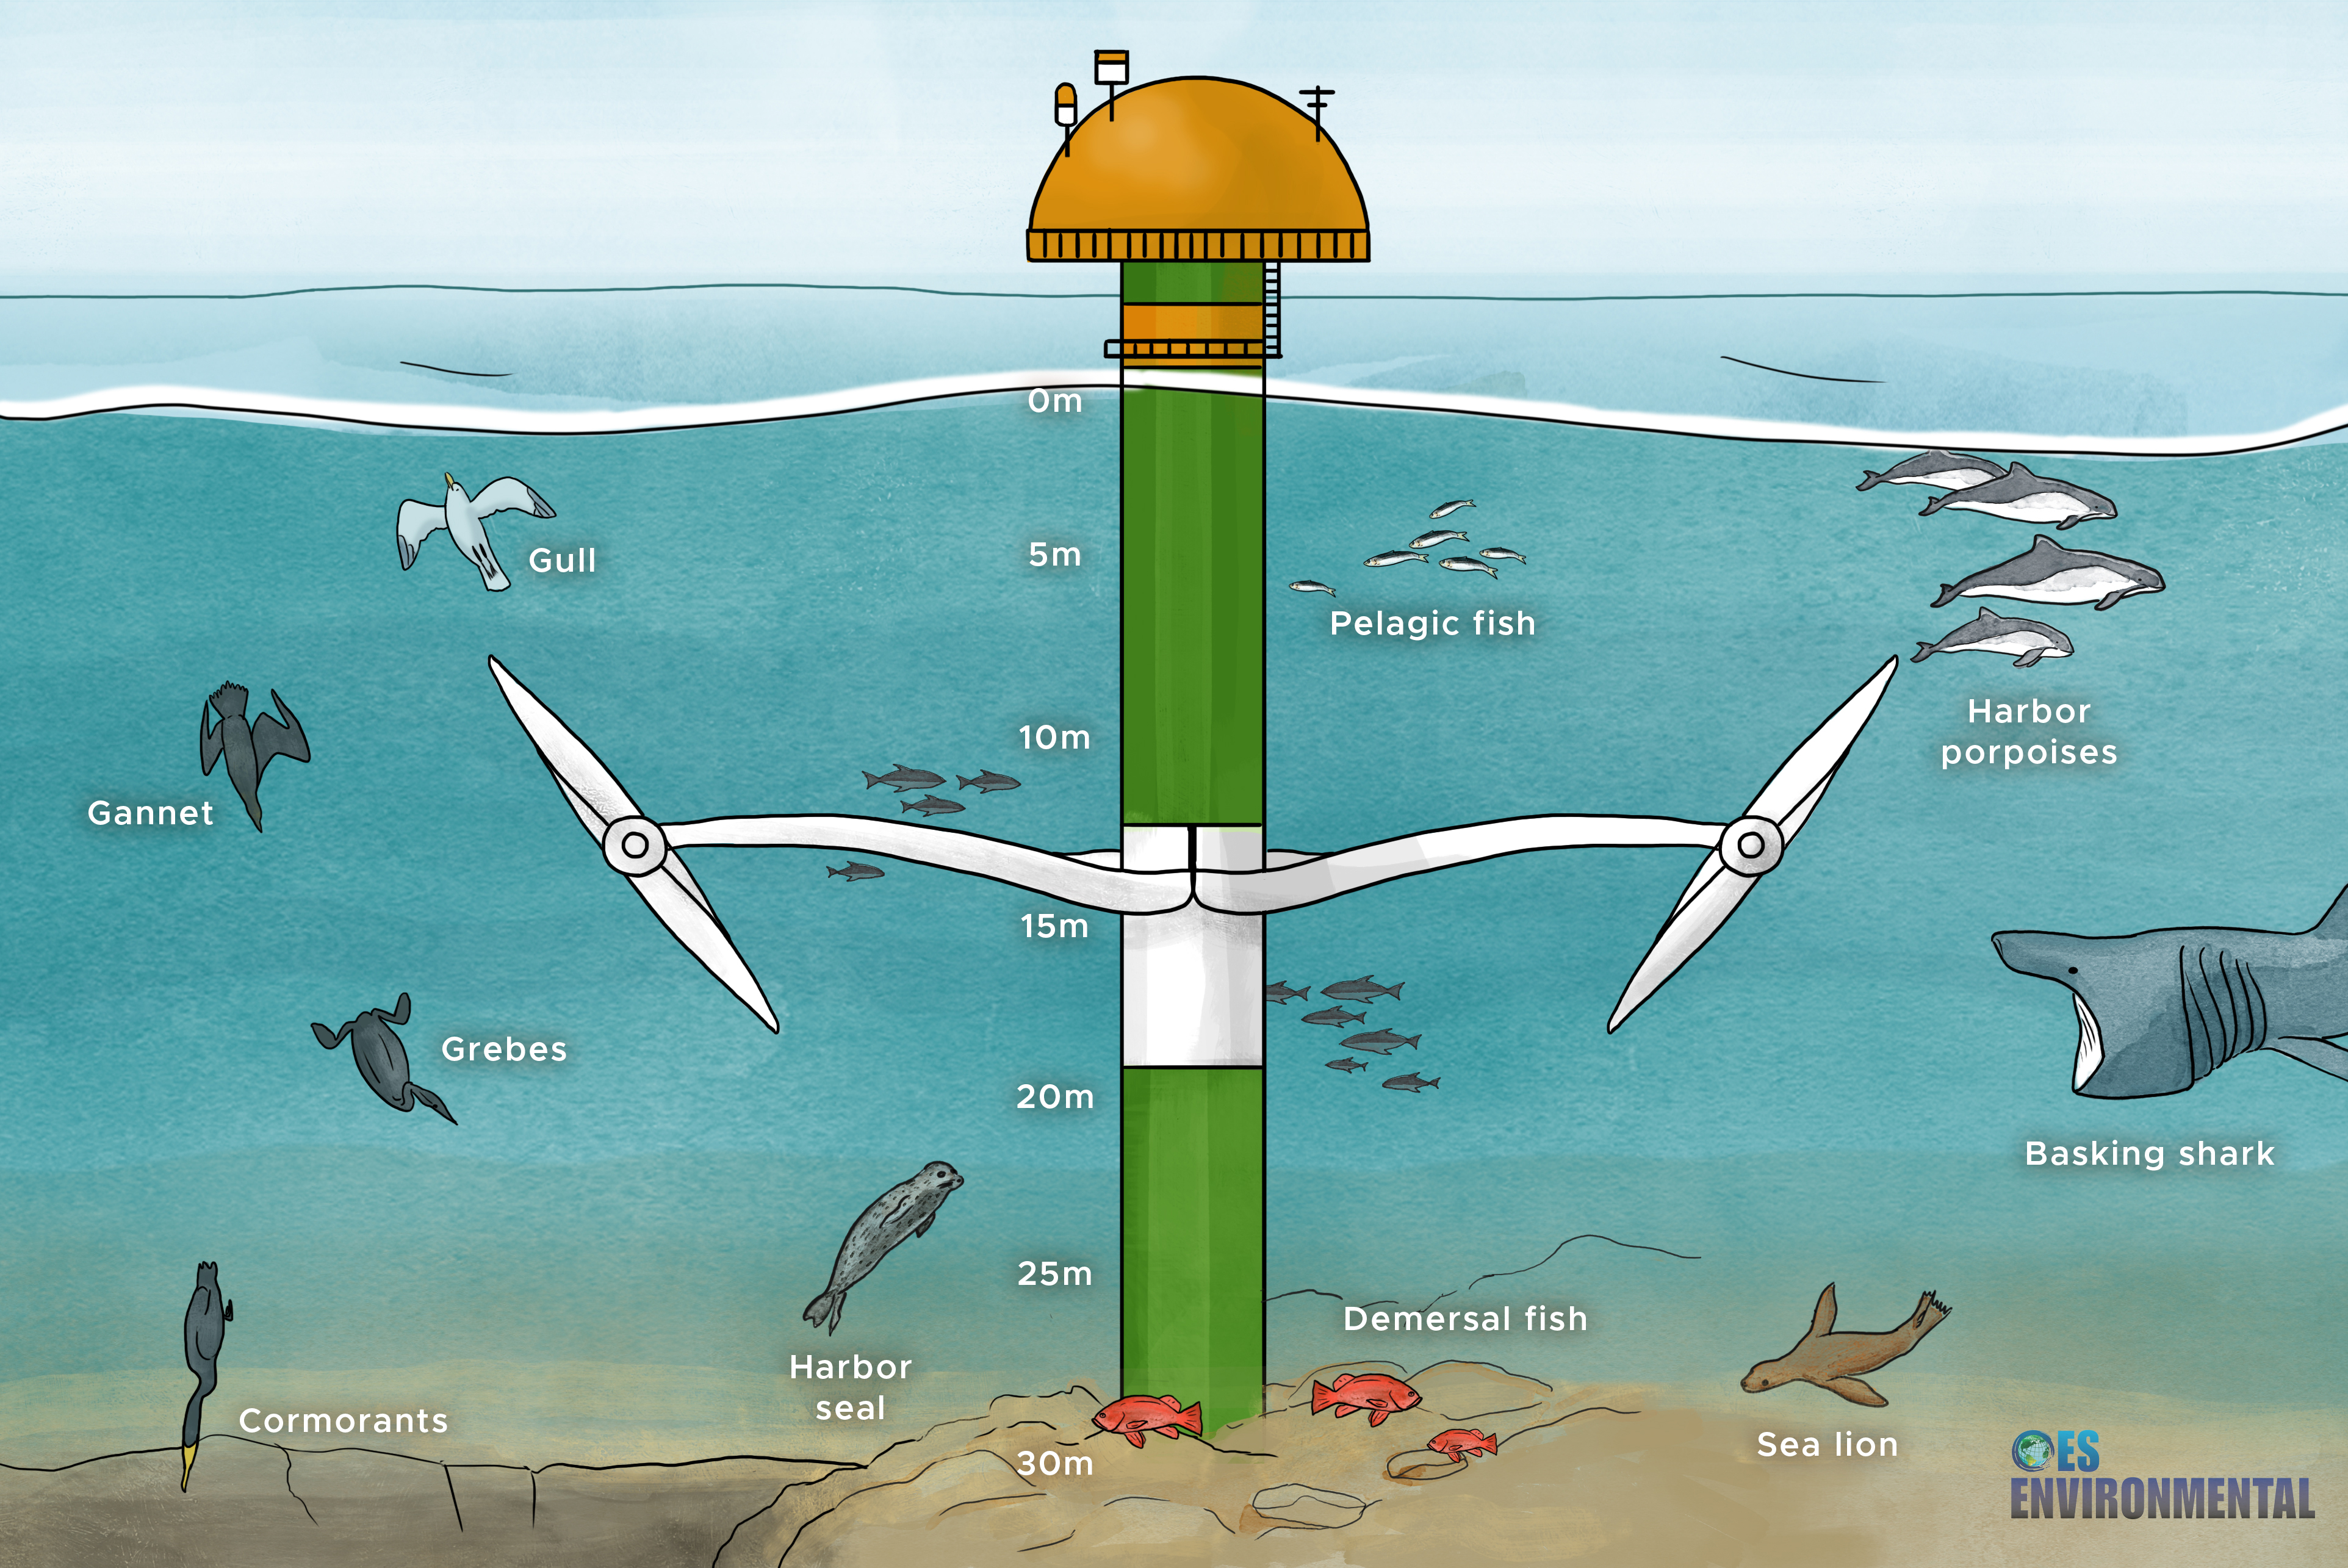 Collision risk figure showing tidal device and marine animals by depth